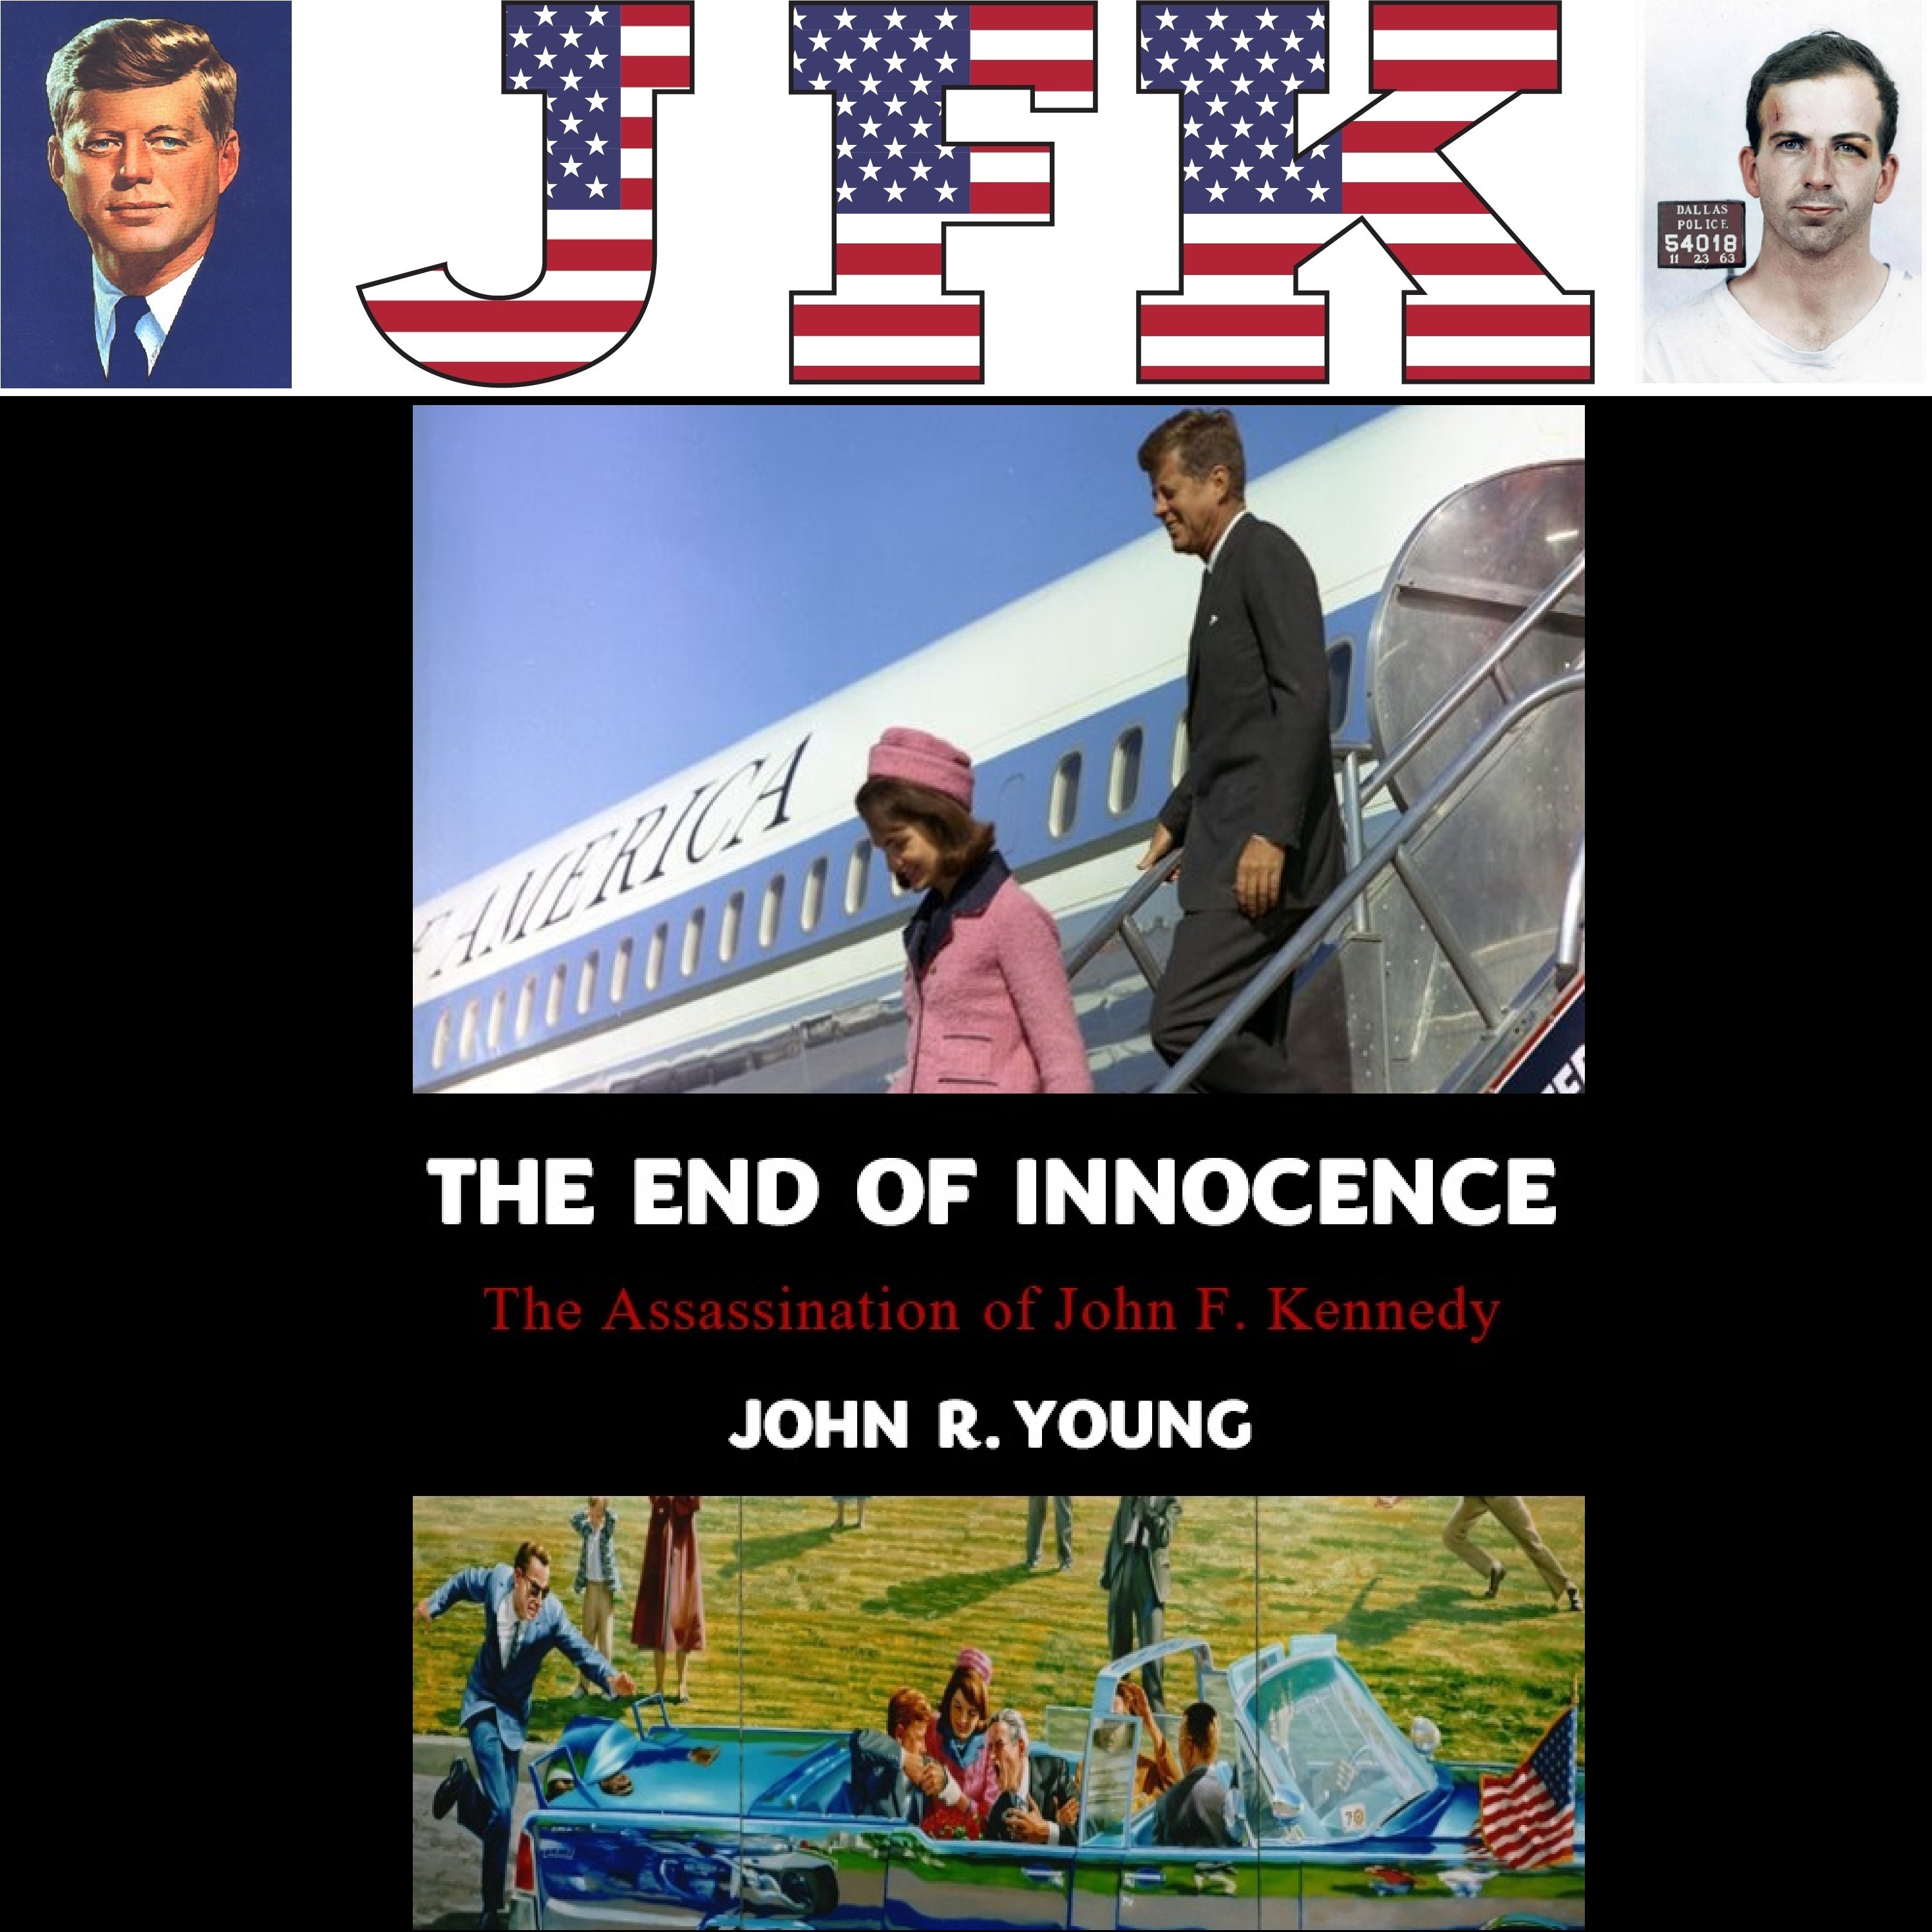 Episode 57 - The book release of ”The End of Innocence - The JFK Assassination”